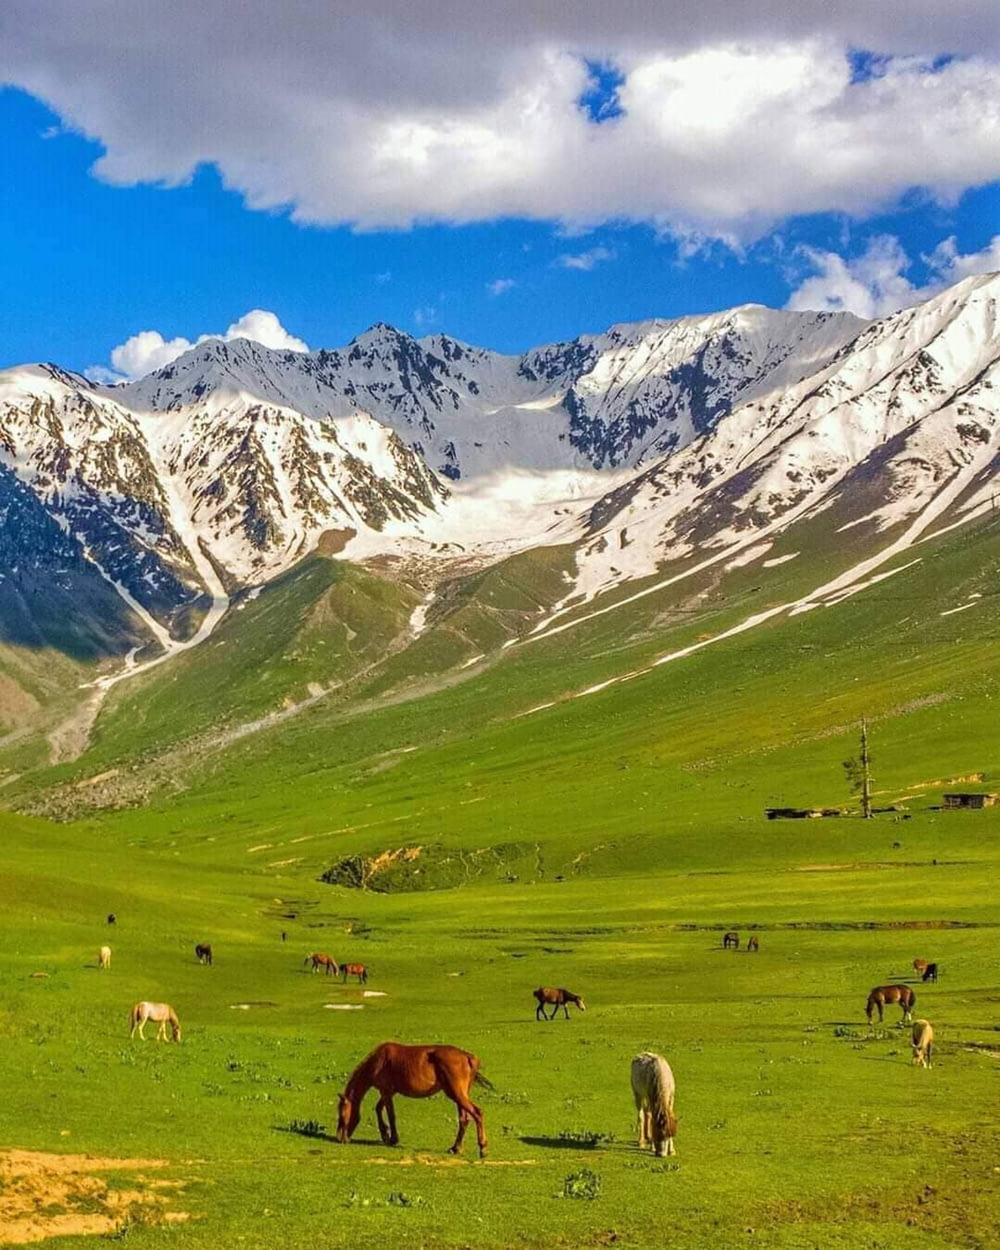 herd of sheep on green grass field near snow covered mountains during daytime